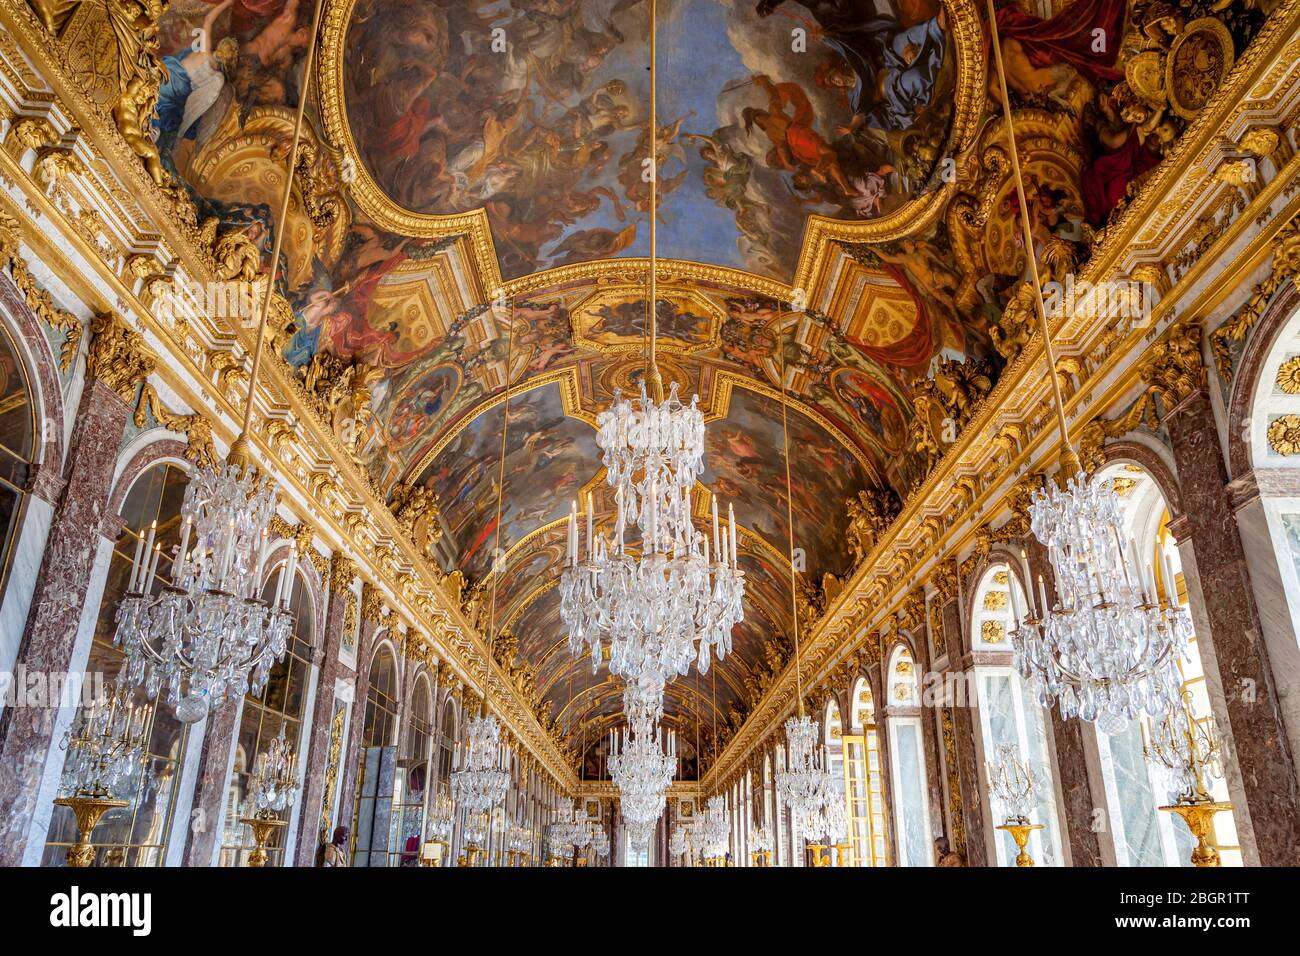 Ceiling and chandeliers (Lustre) in the Hall of Mirrors, Chateau de Versailles, France Stock Photo